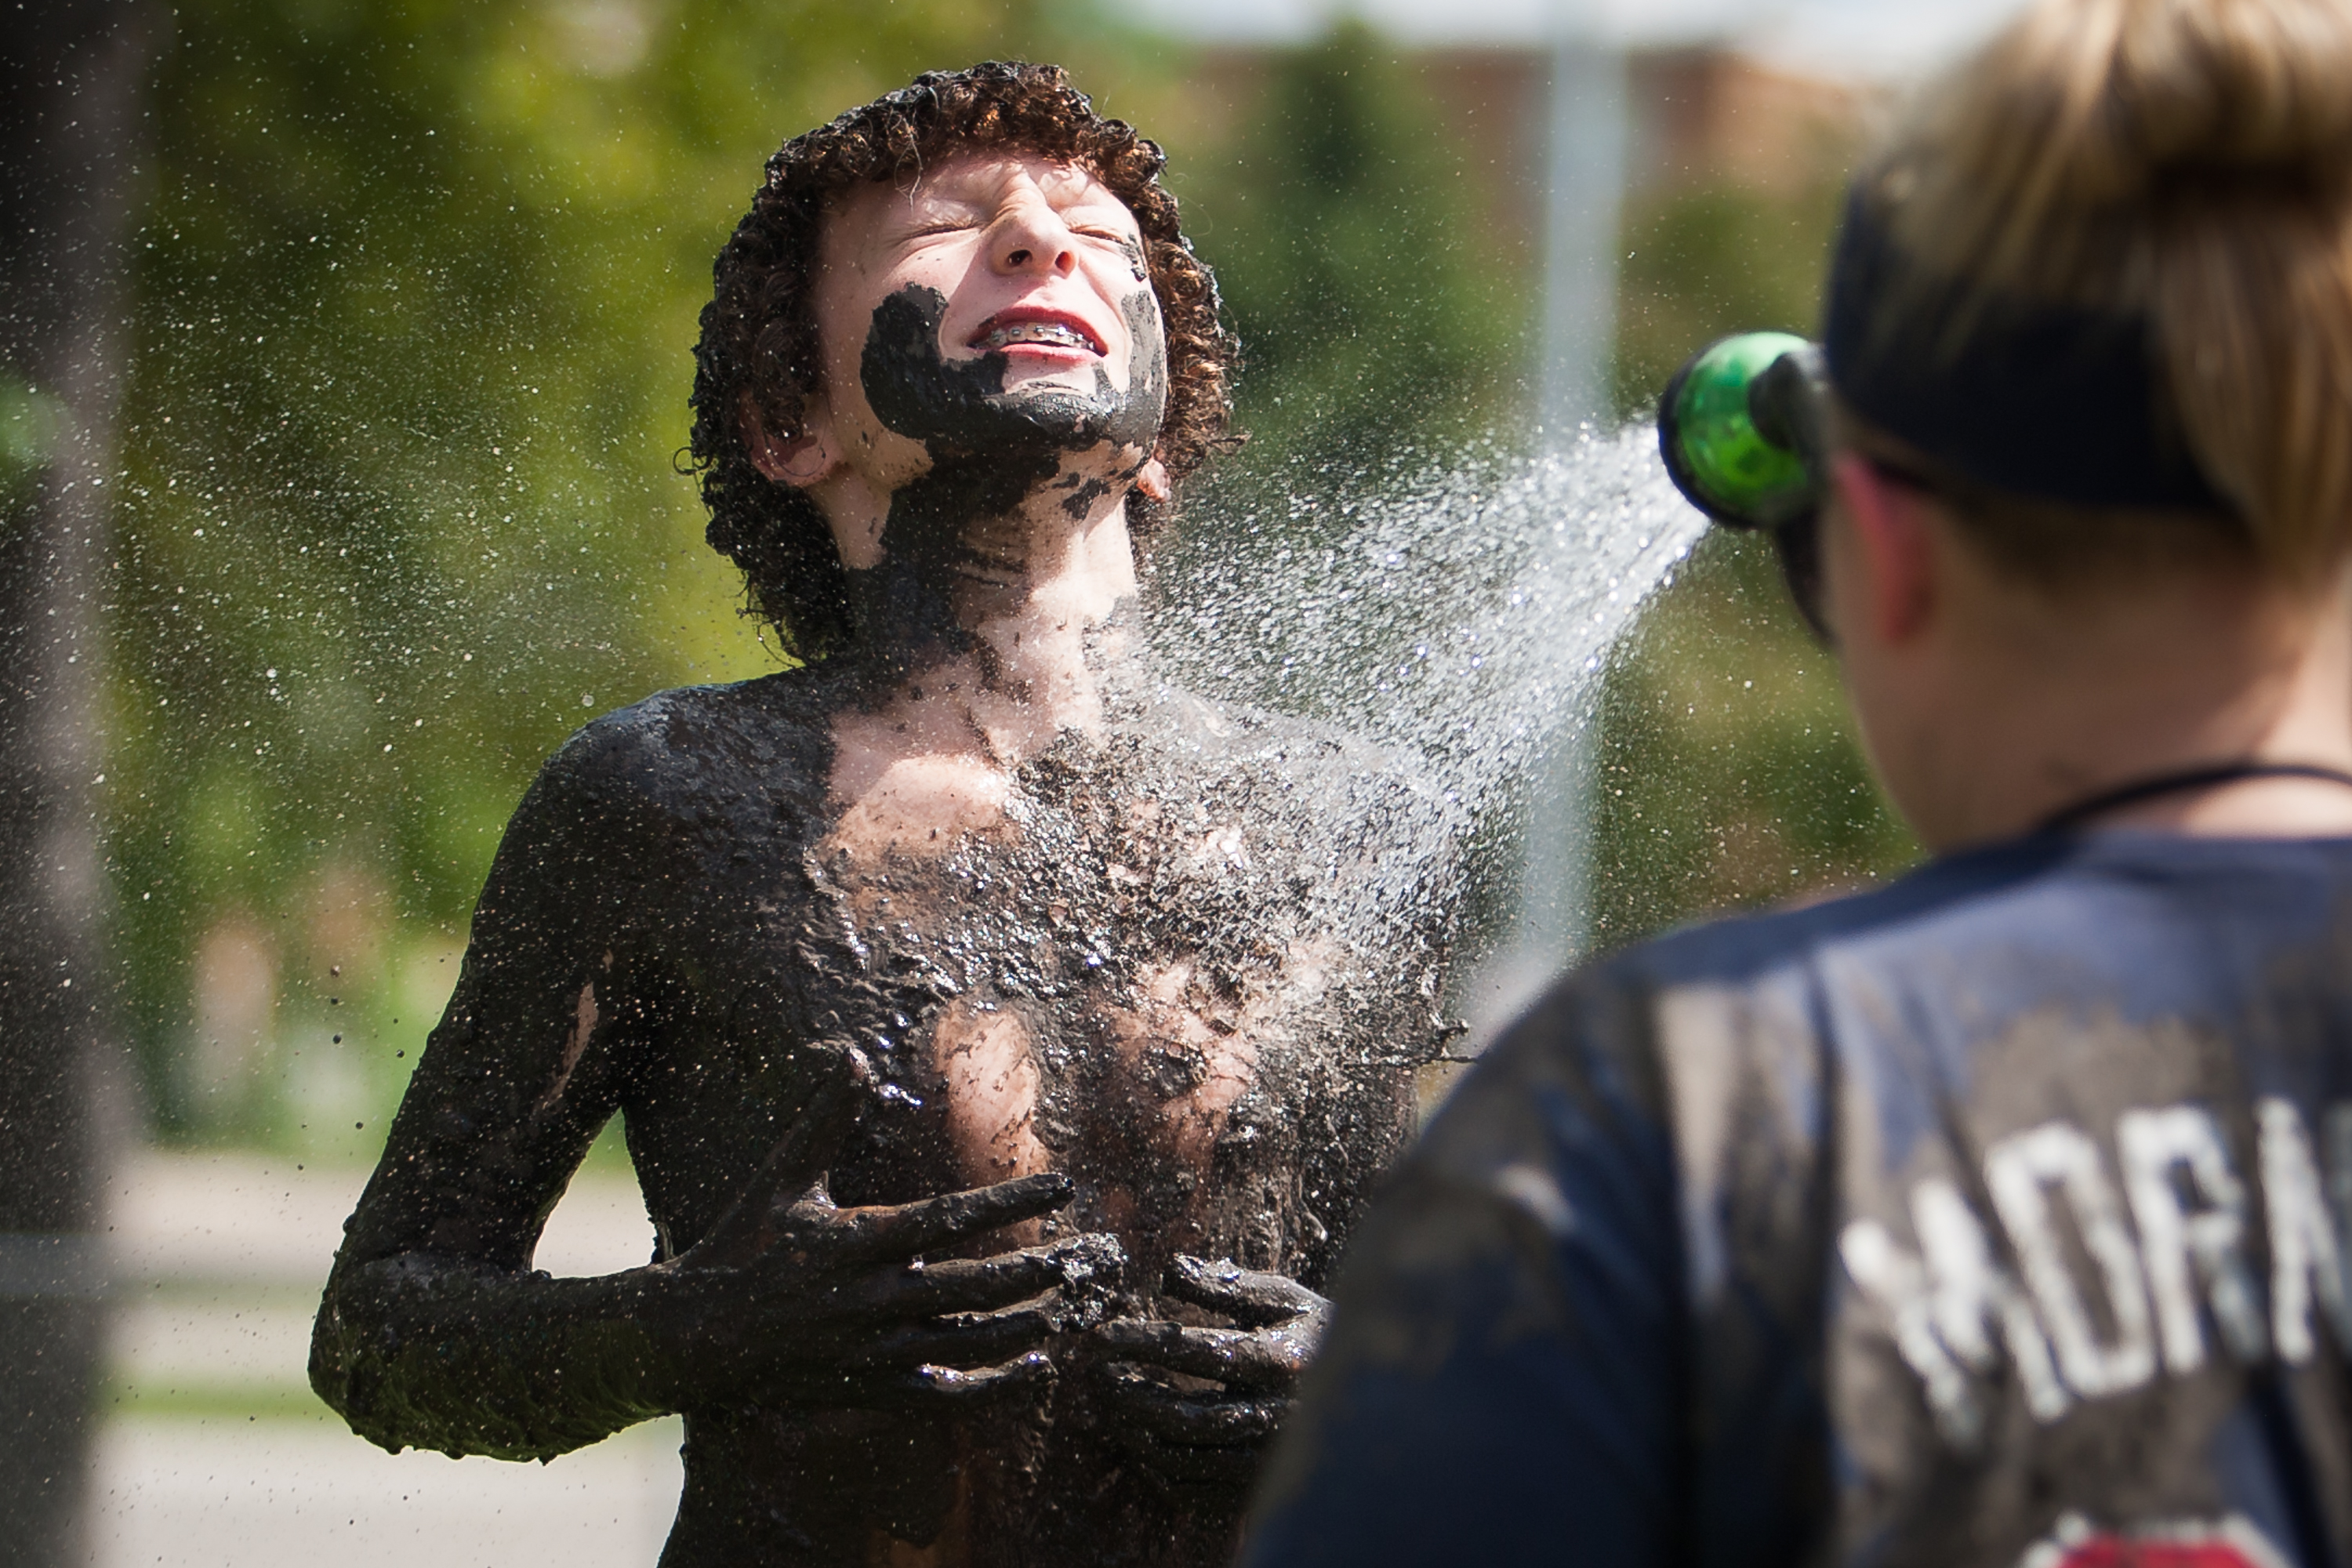 Theo Sum gets sprayed down after participating in International Mud Day at the University Children's Learning Center at the University of North Dakota on June 29, 2016 in Grand Forks, N.D.